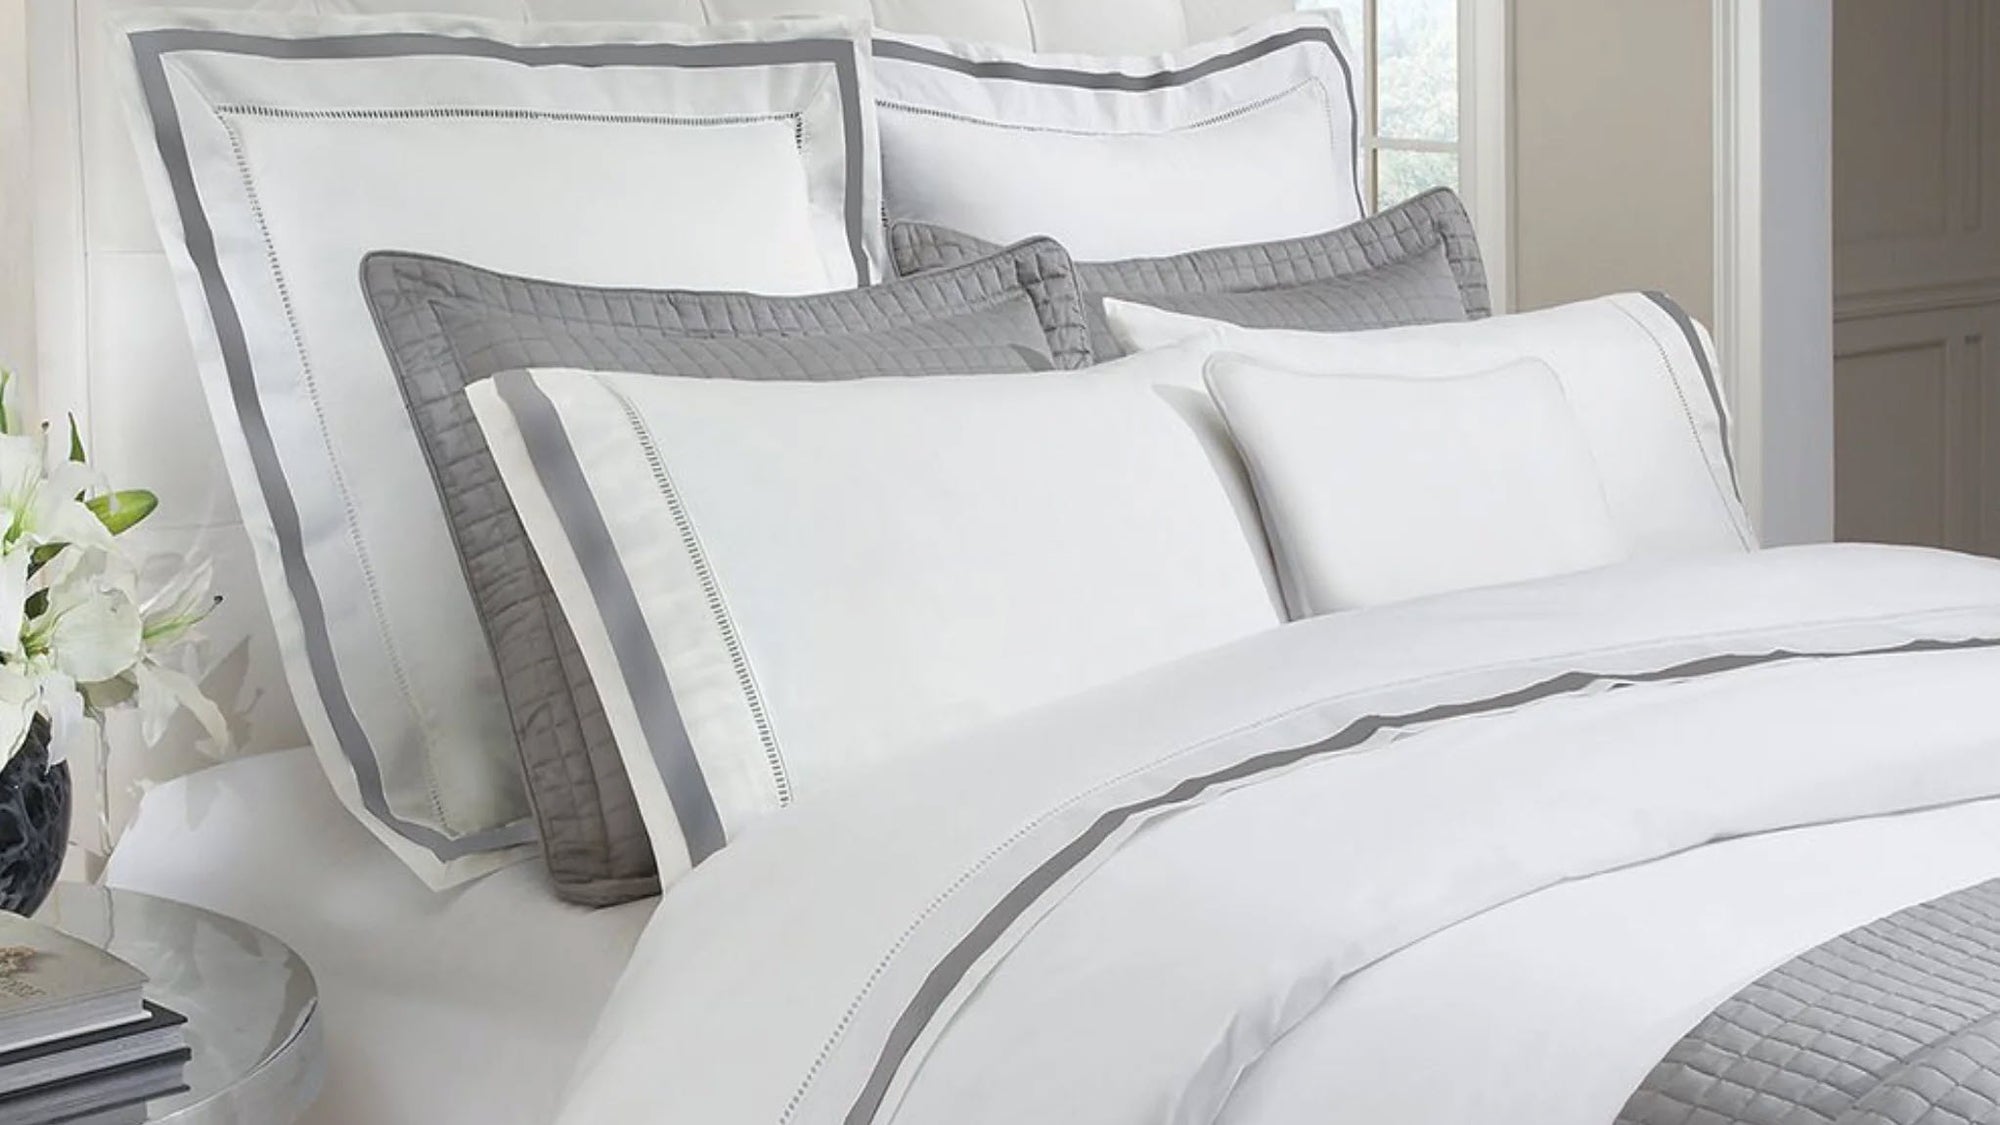 Downtown Company Luxury Bedding: Our Newest Collection